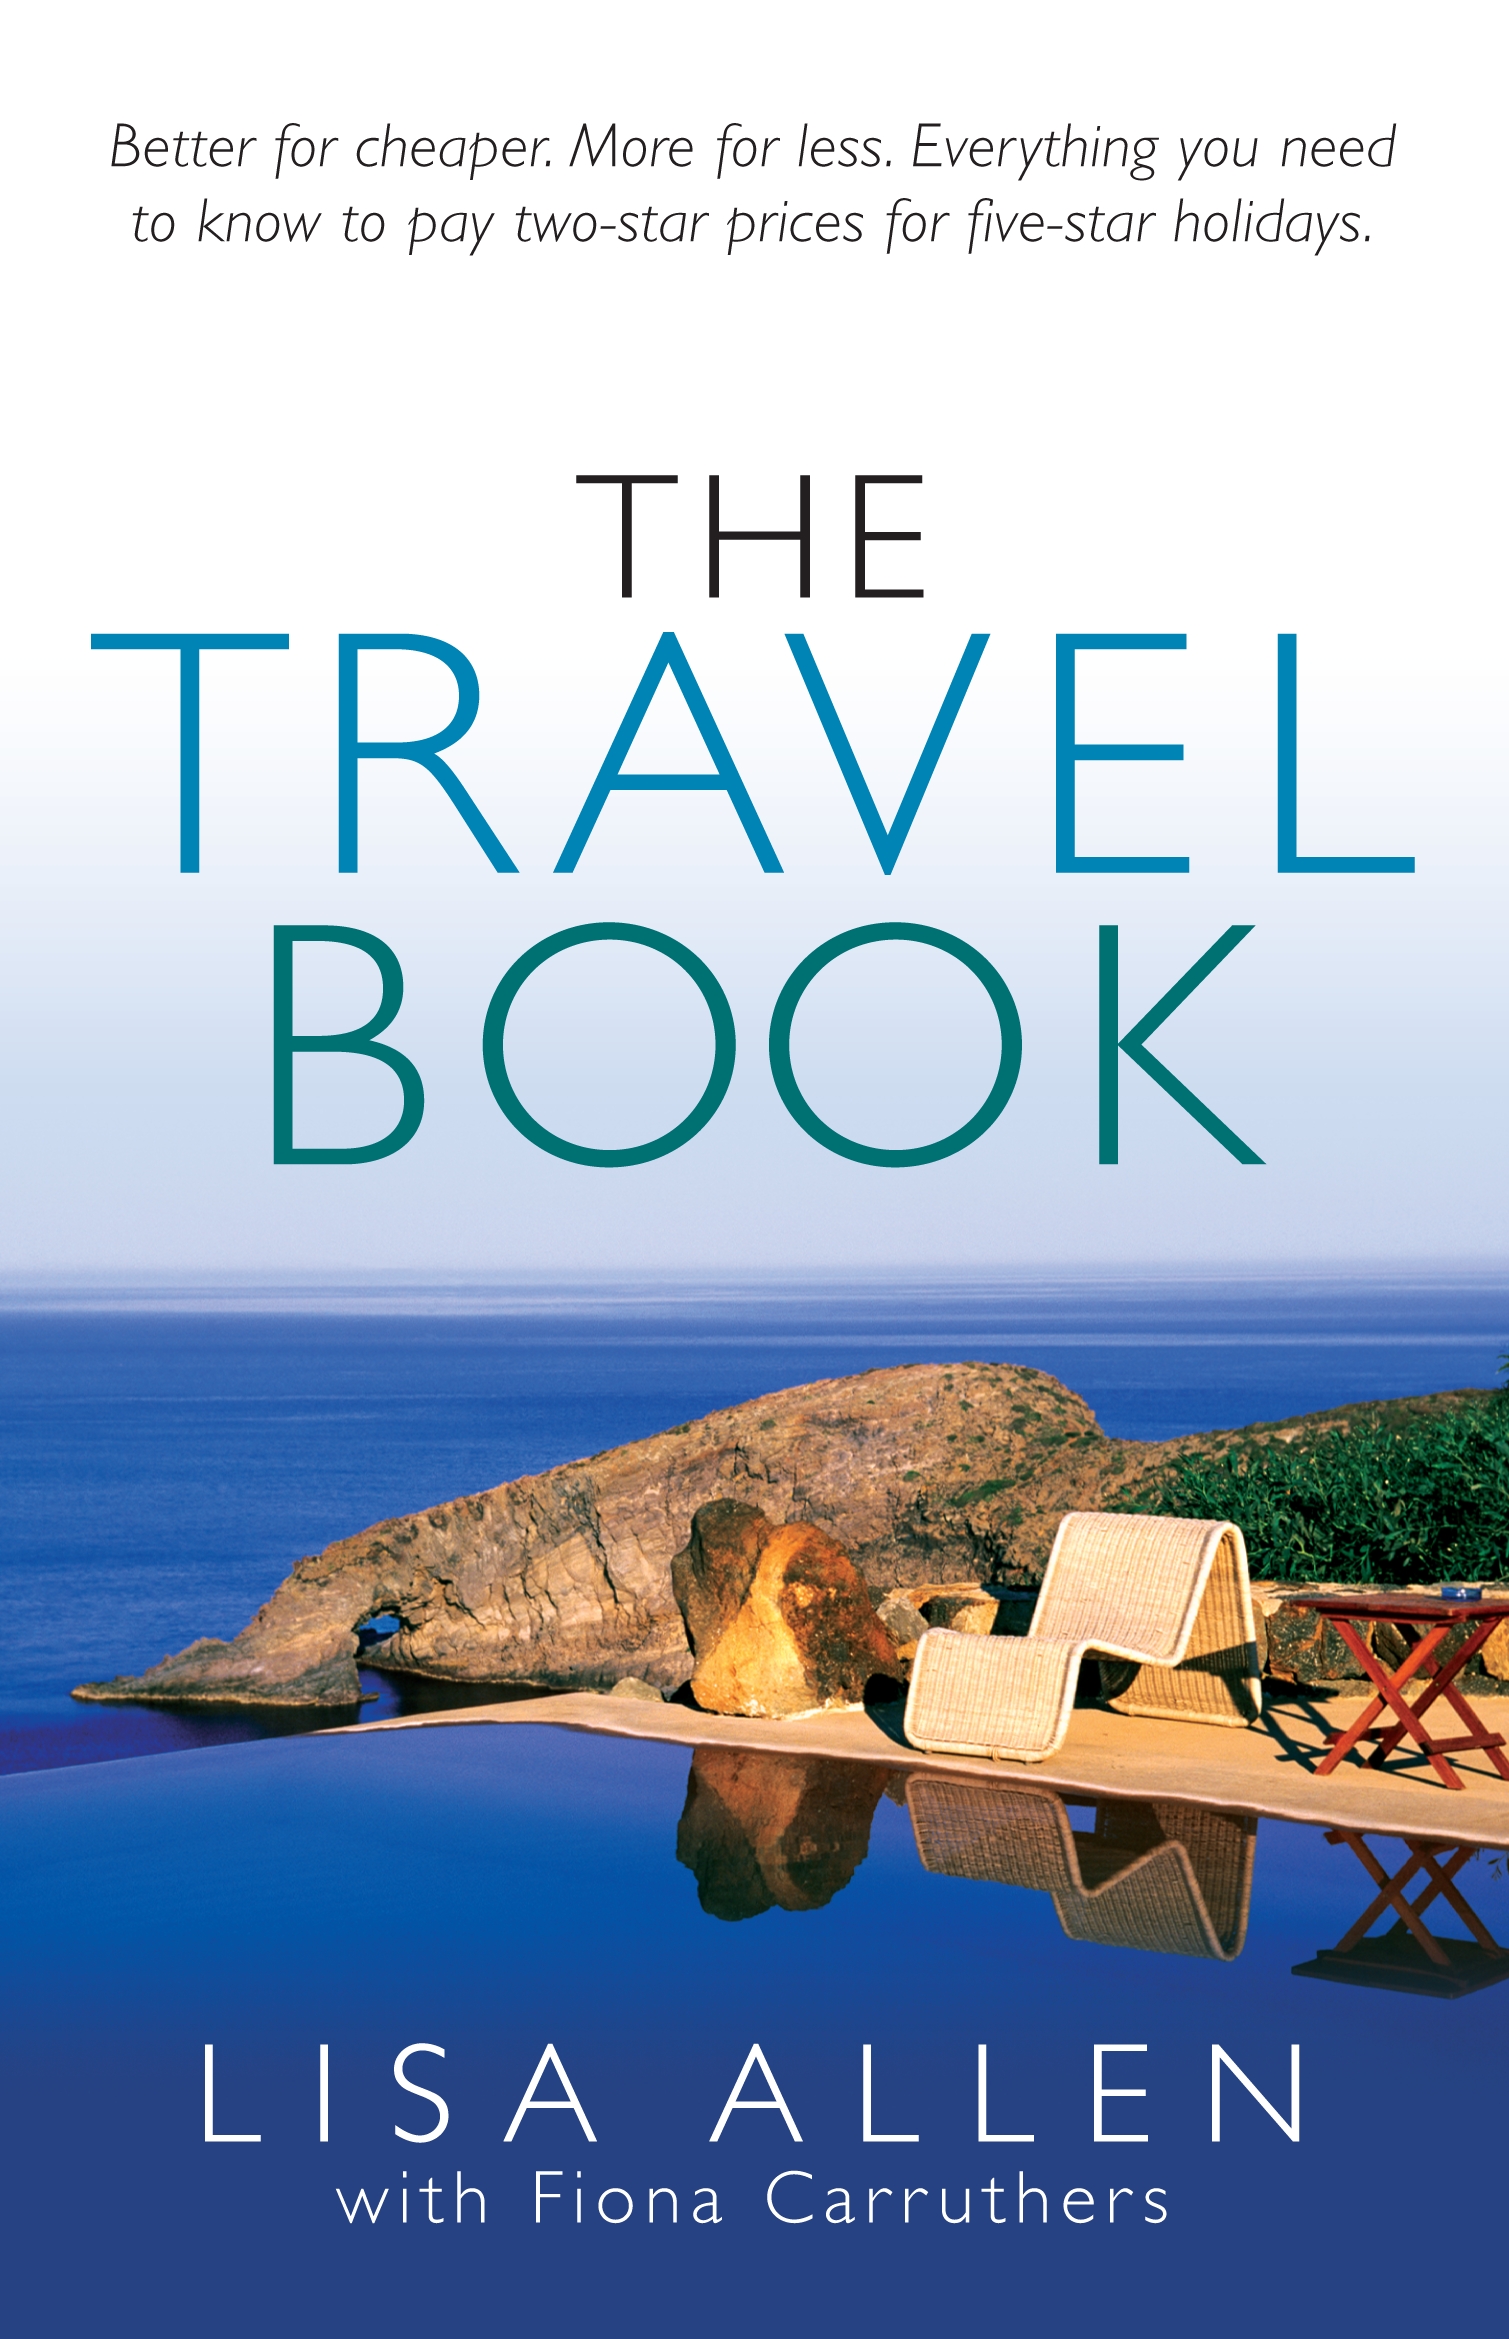 The Travel Book by Lisa Allen - Penguin Books New Zealand